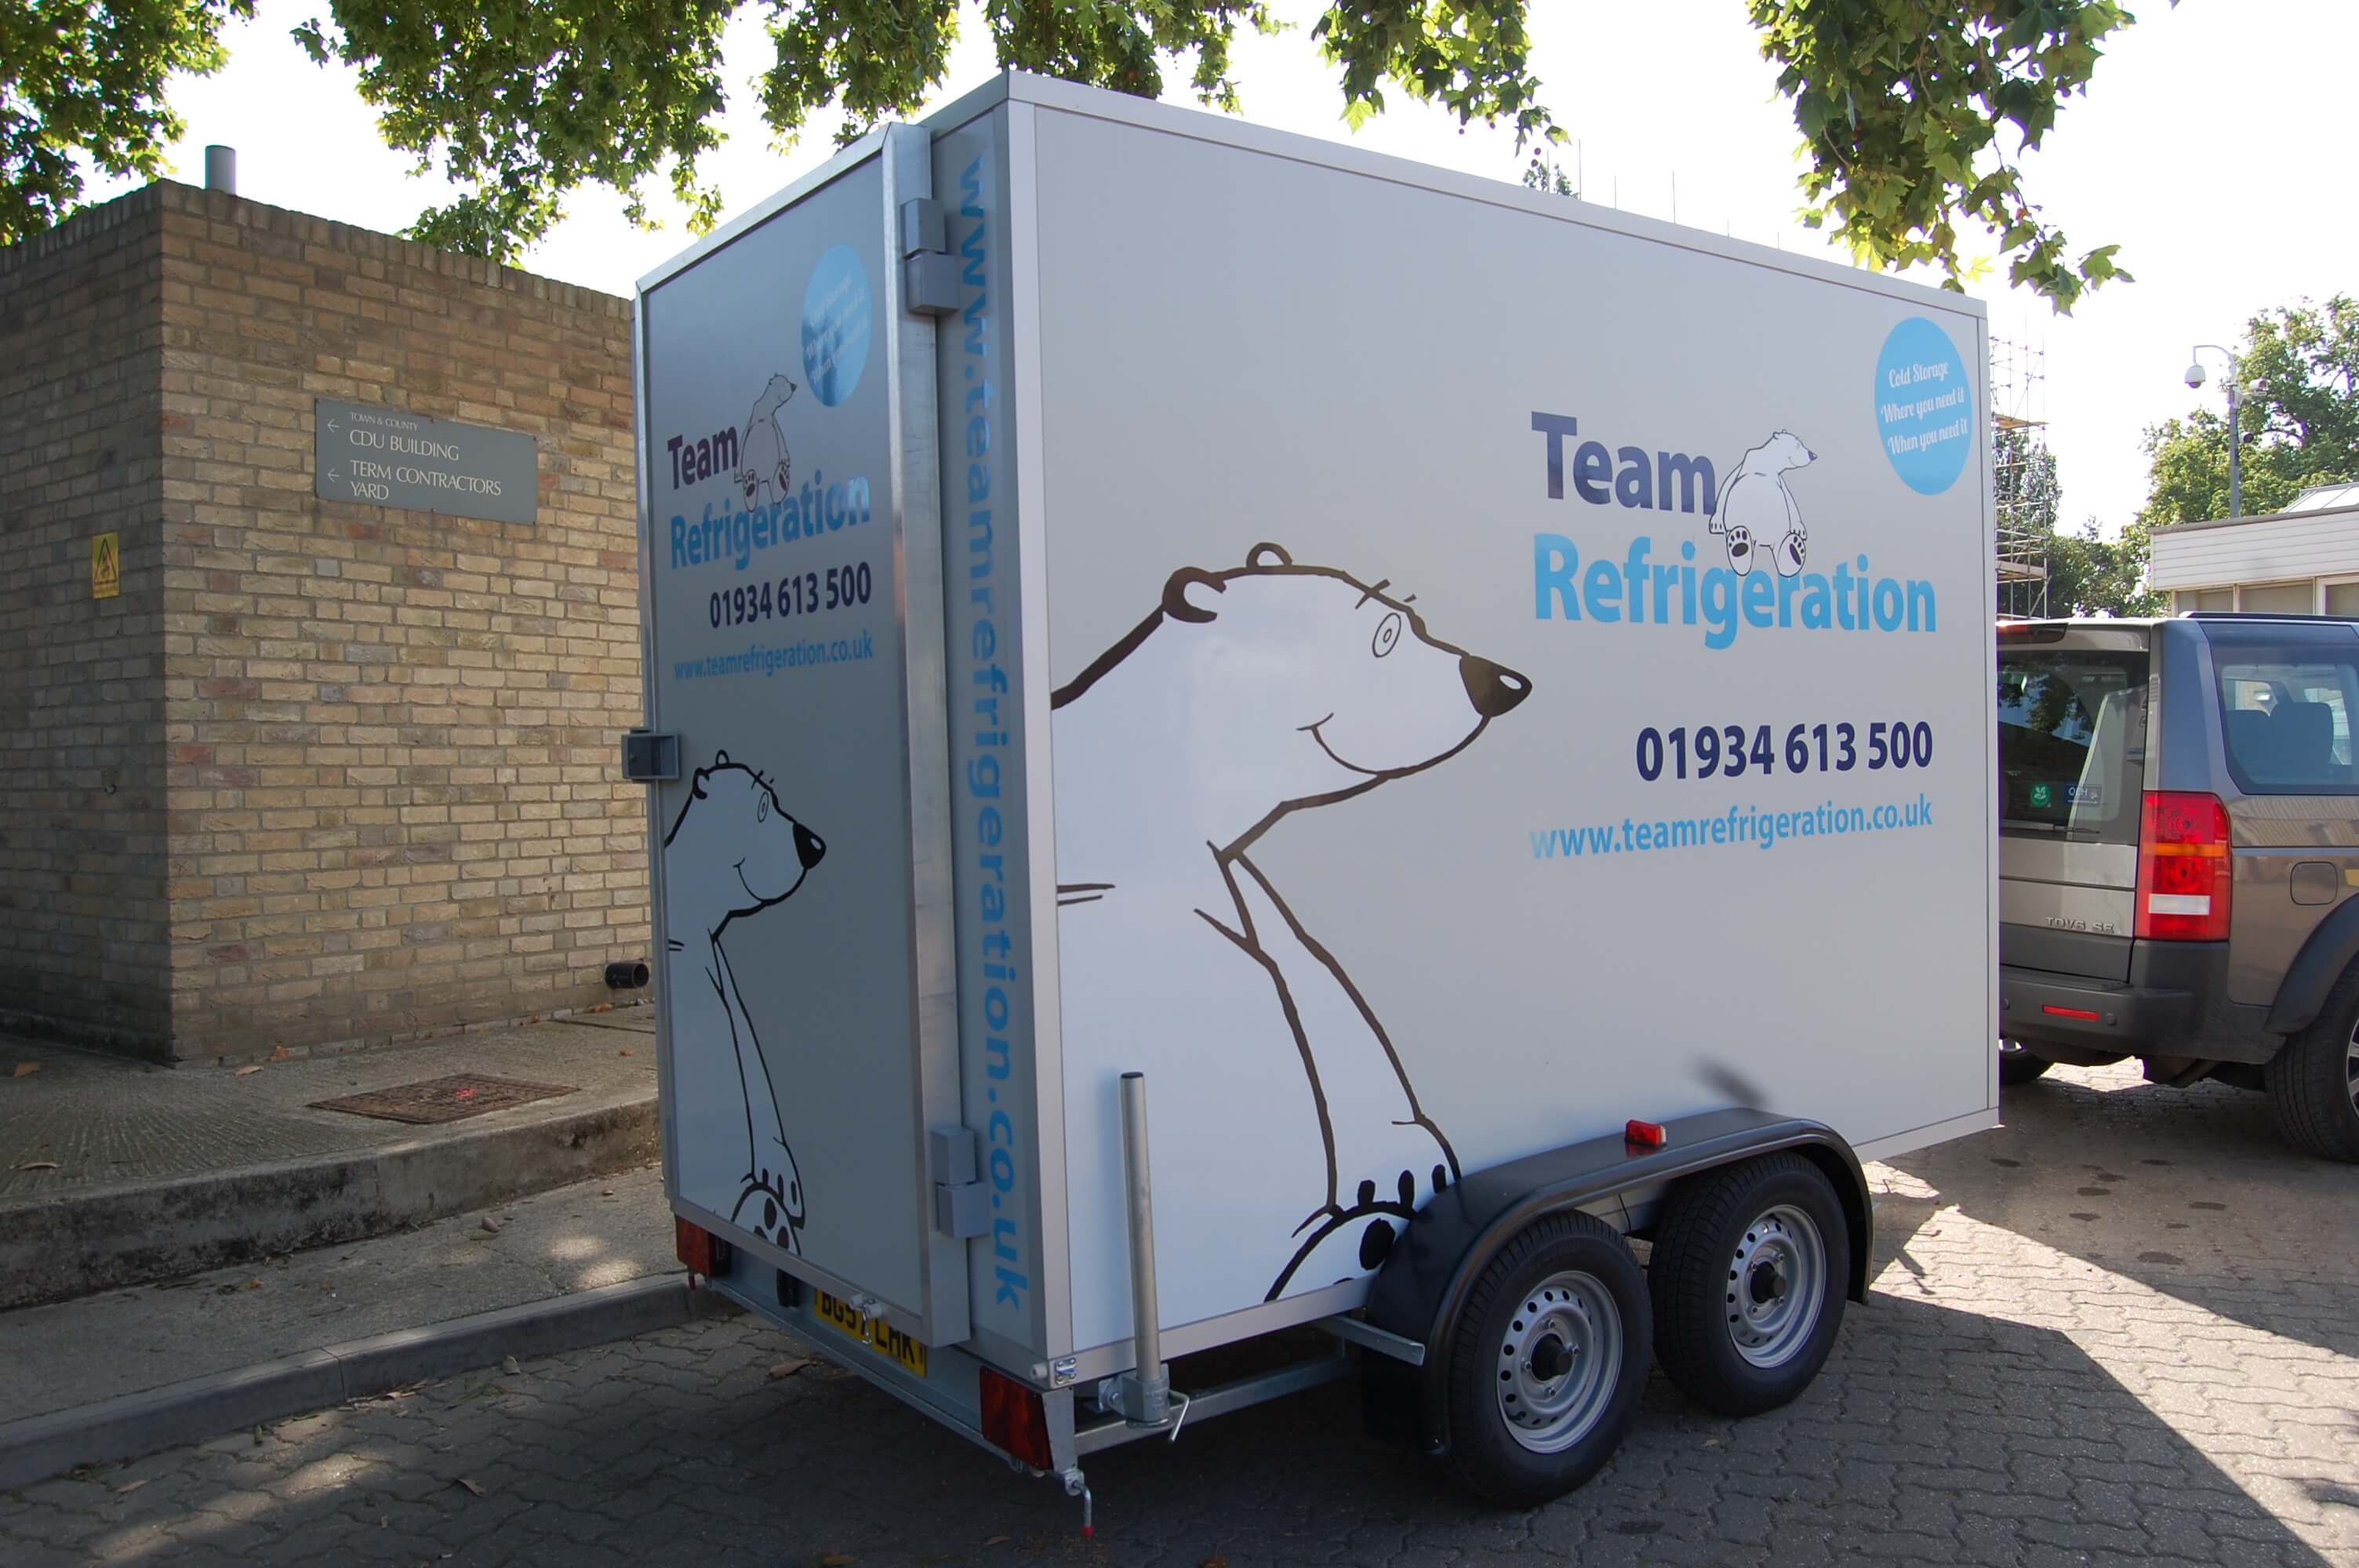 Hire refrigerated trailer or hire refrigerated container to minimise start up costs.